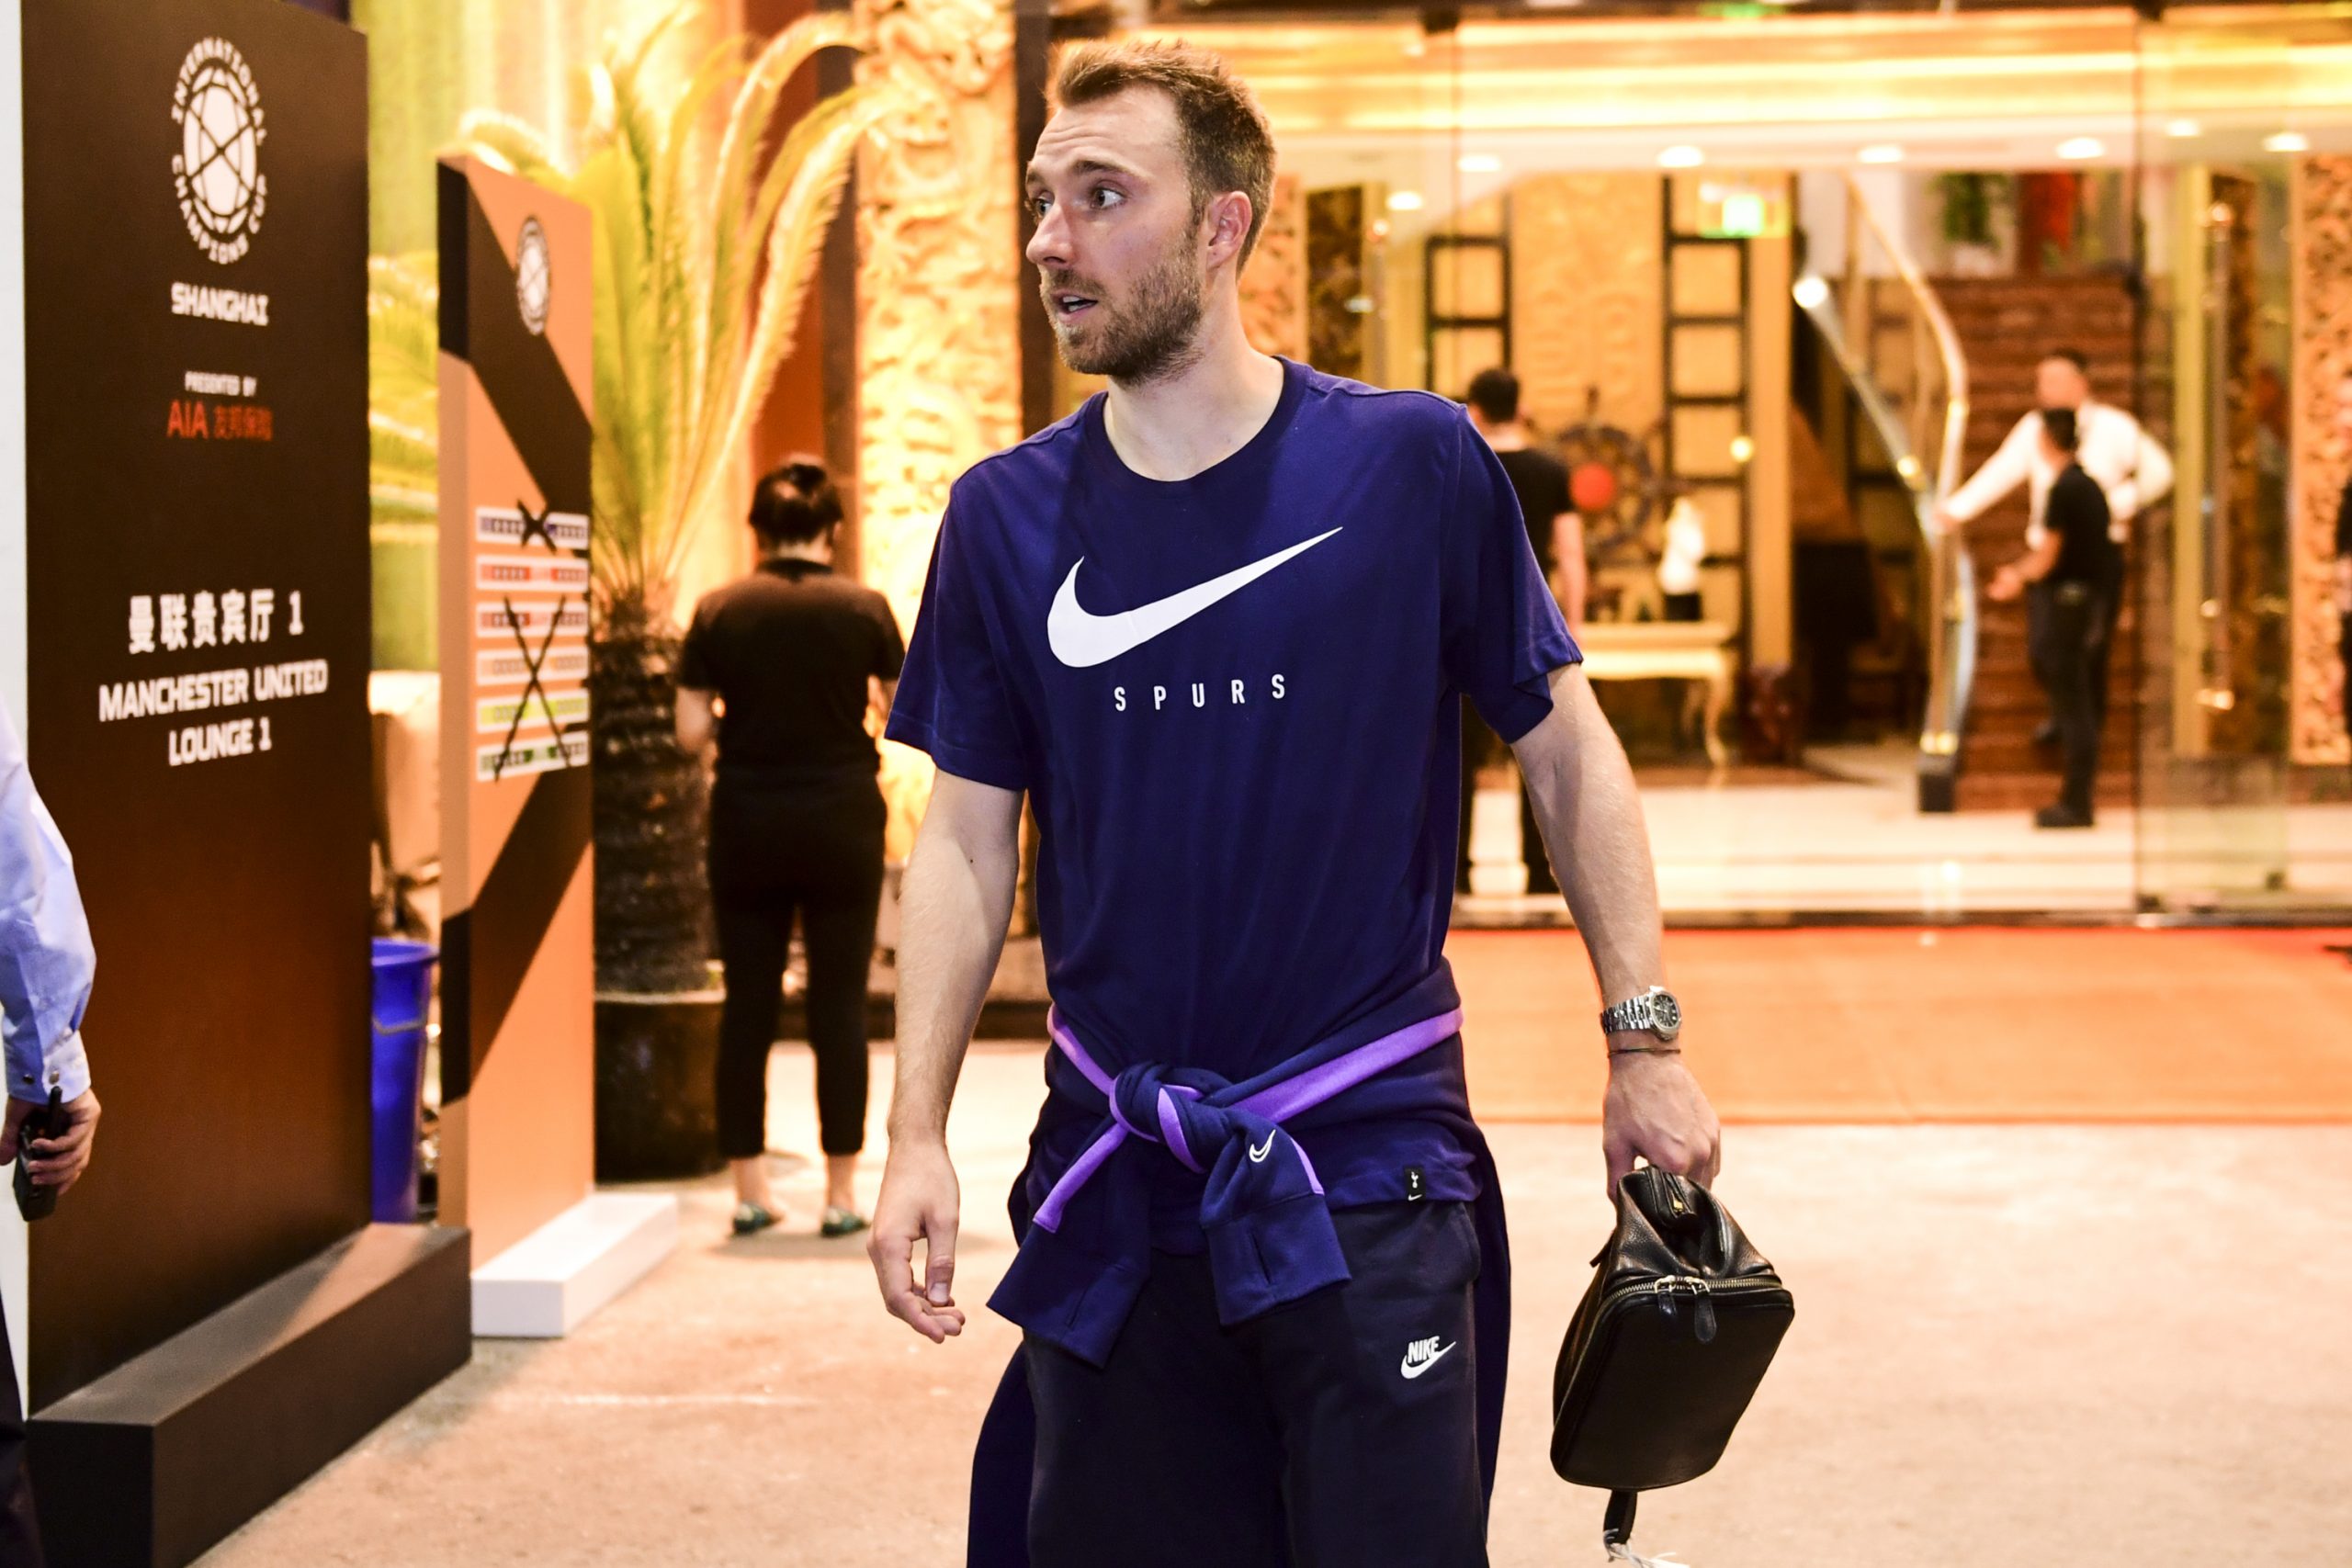 SHANGHAI, CHINA - JULY 25: #23 Christian Eriksen of Tottenham Hotspur leaves the stadium after the International Champions Cup match between Tottenham Hotspur and Manchester United at the Shanghai Hongkou Stadium on July 25, 2019 in Shanghai, China. (Photo by Di Yin/Getty Images)